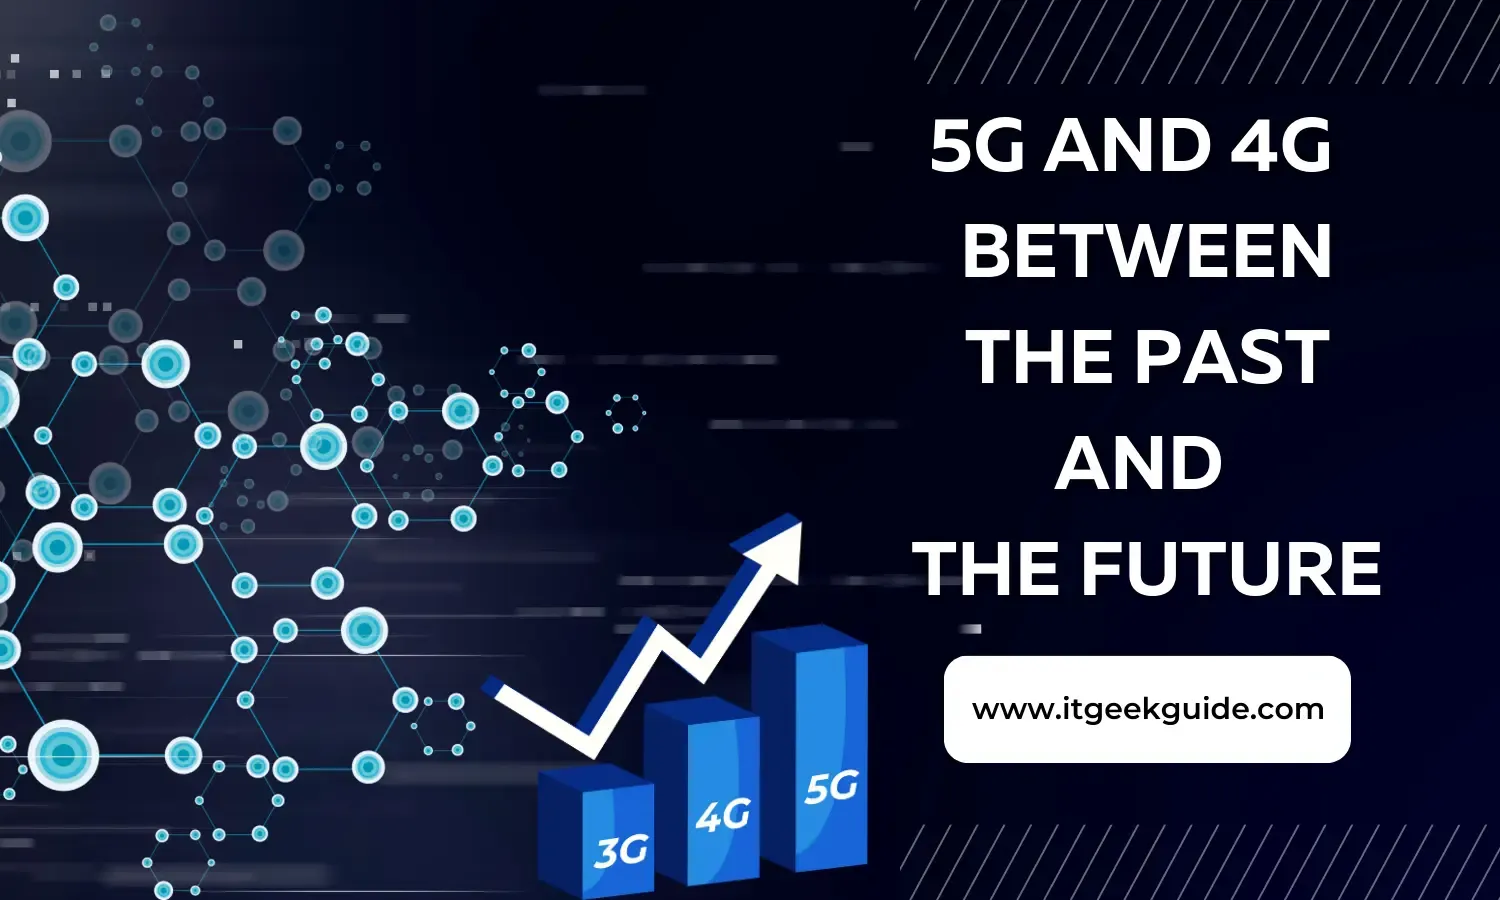 5G and 4G Technologies: Between the Past and the Future